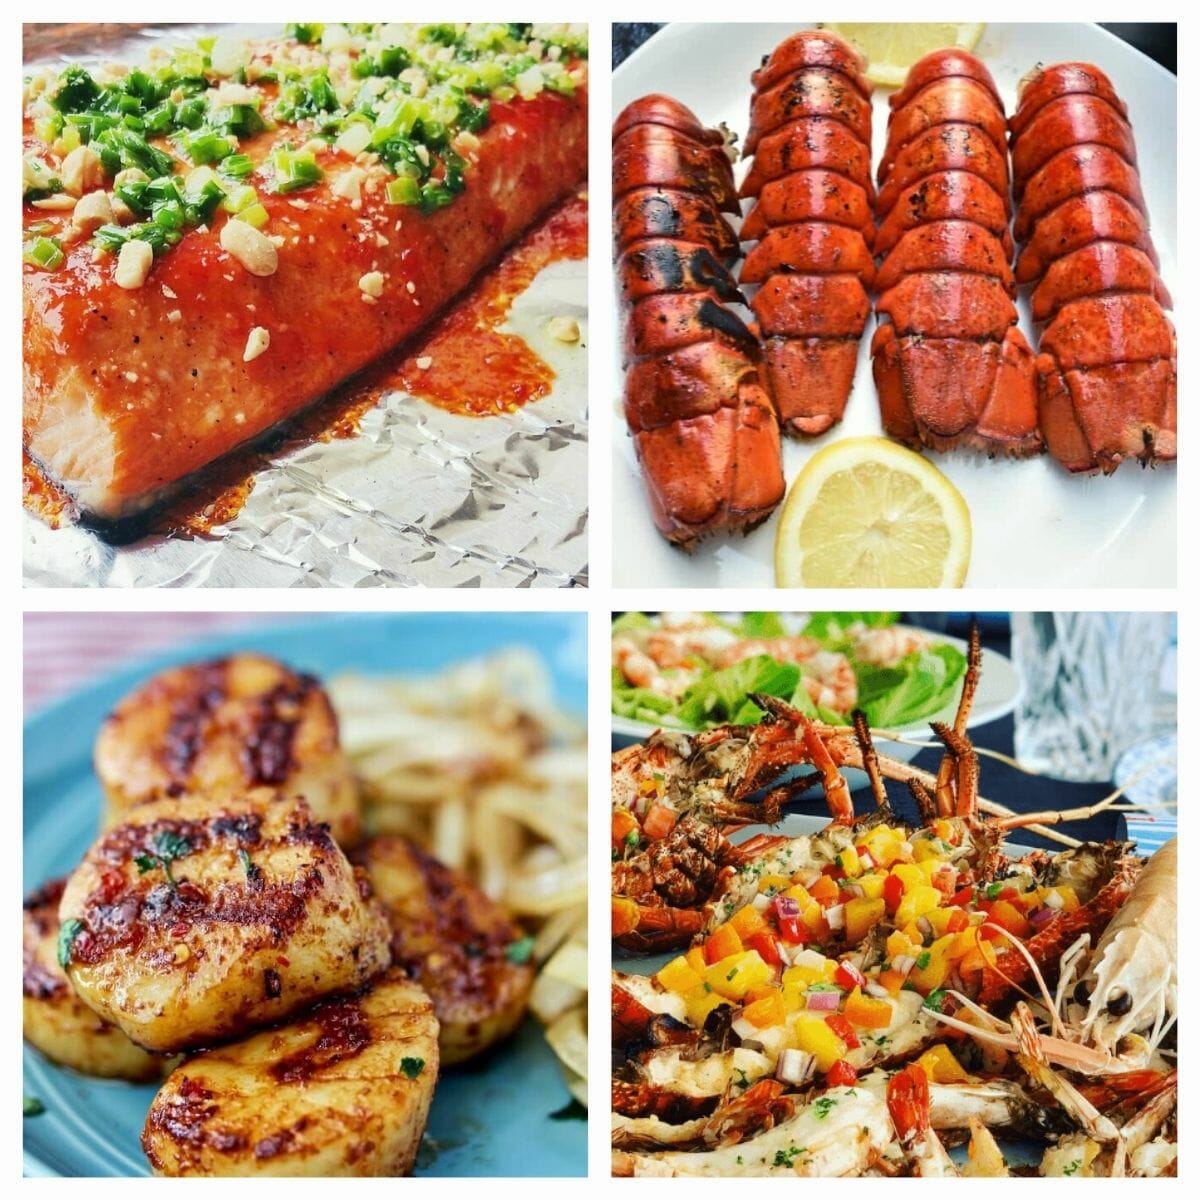 tasty and easy summer recipes with seafood: salmon, lobsters and scallops